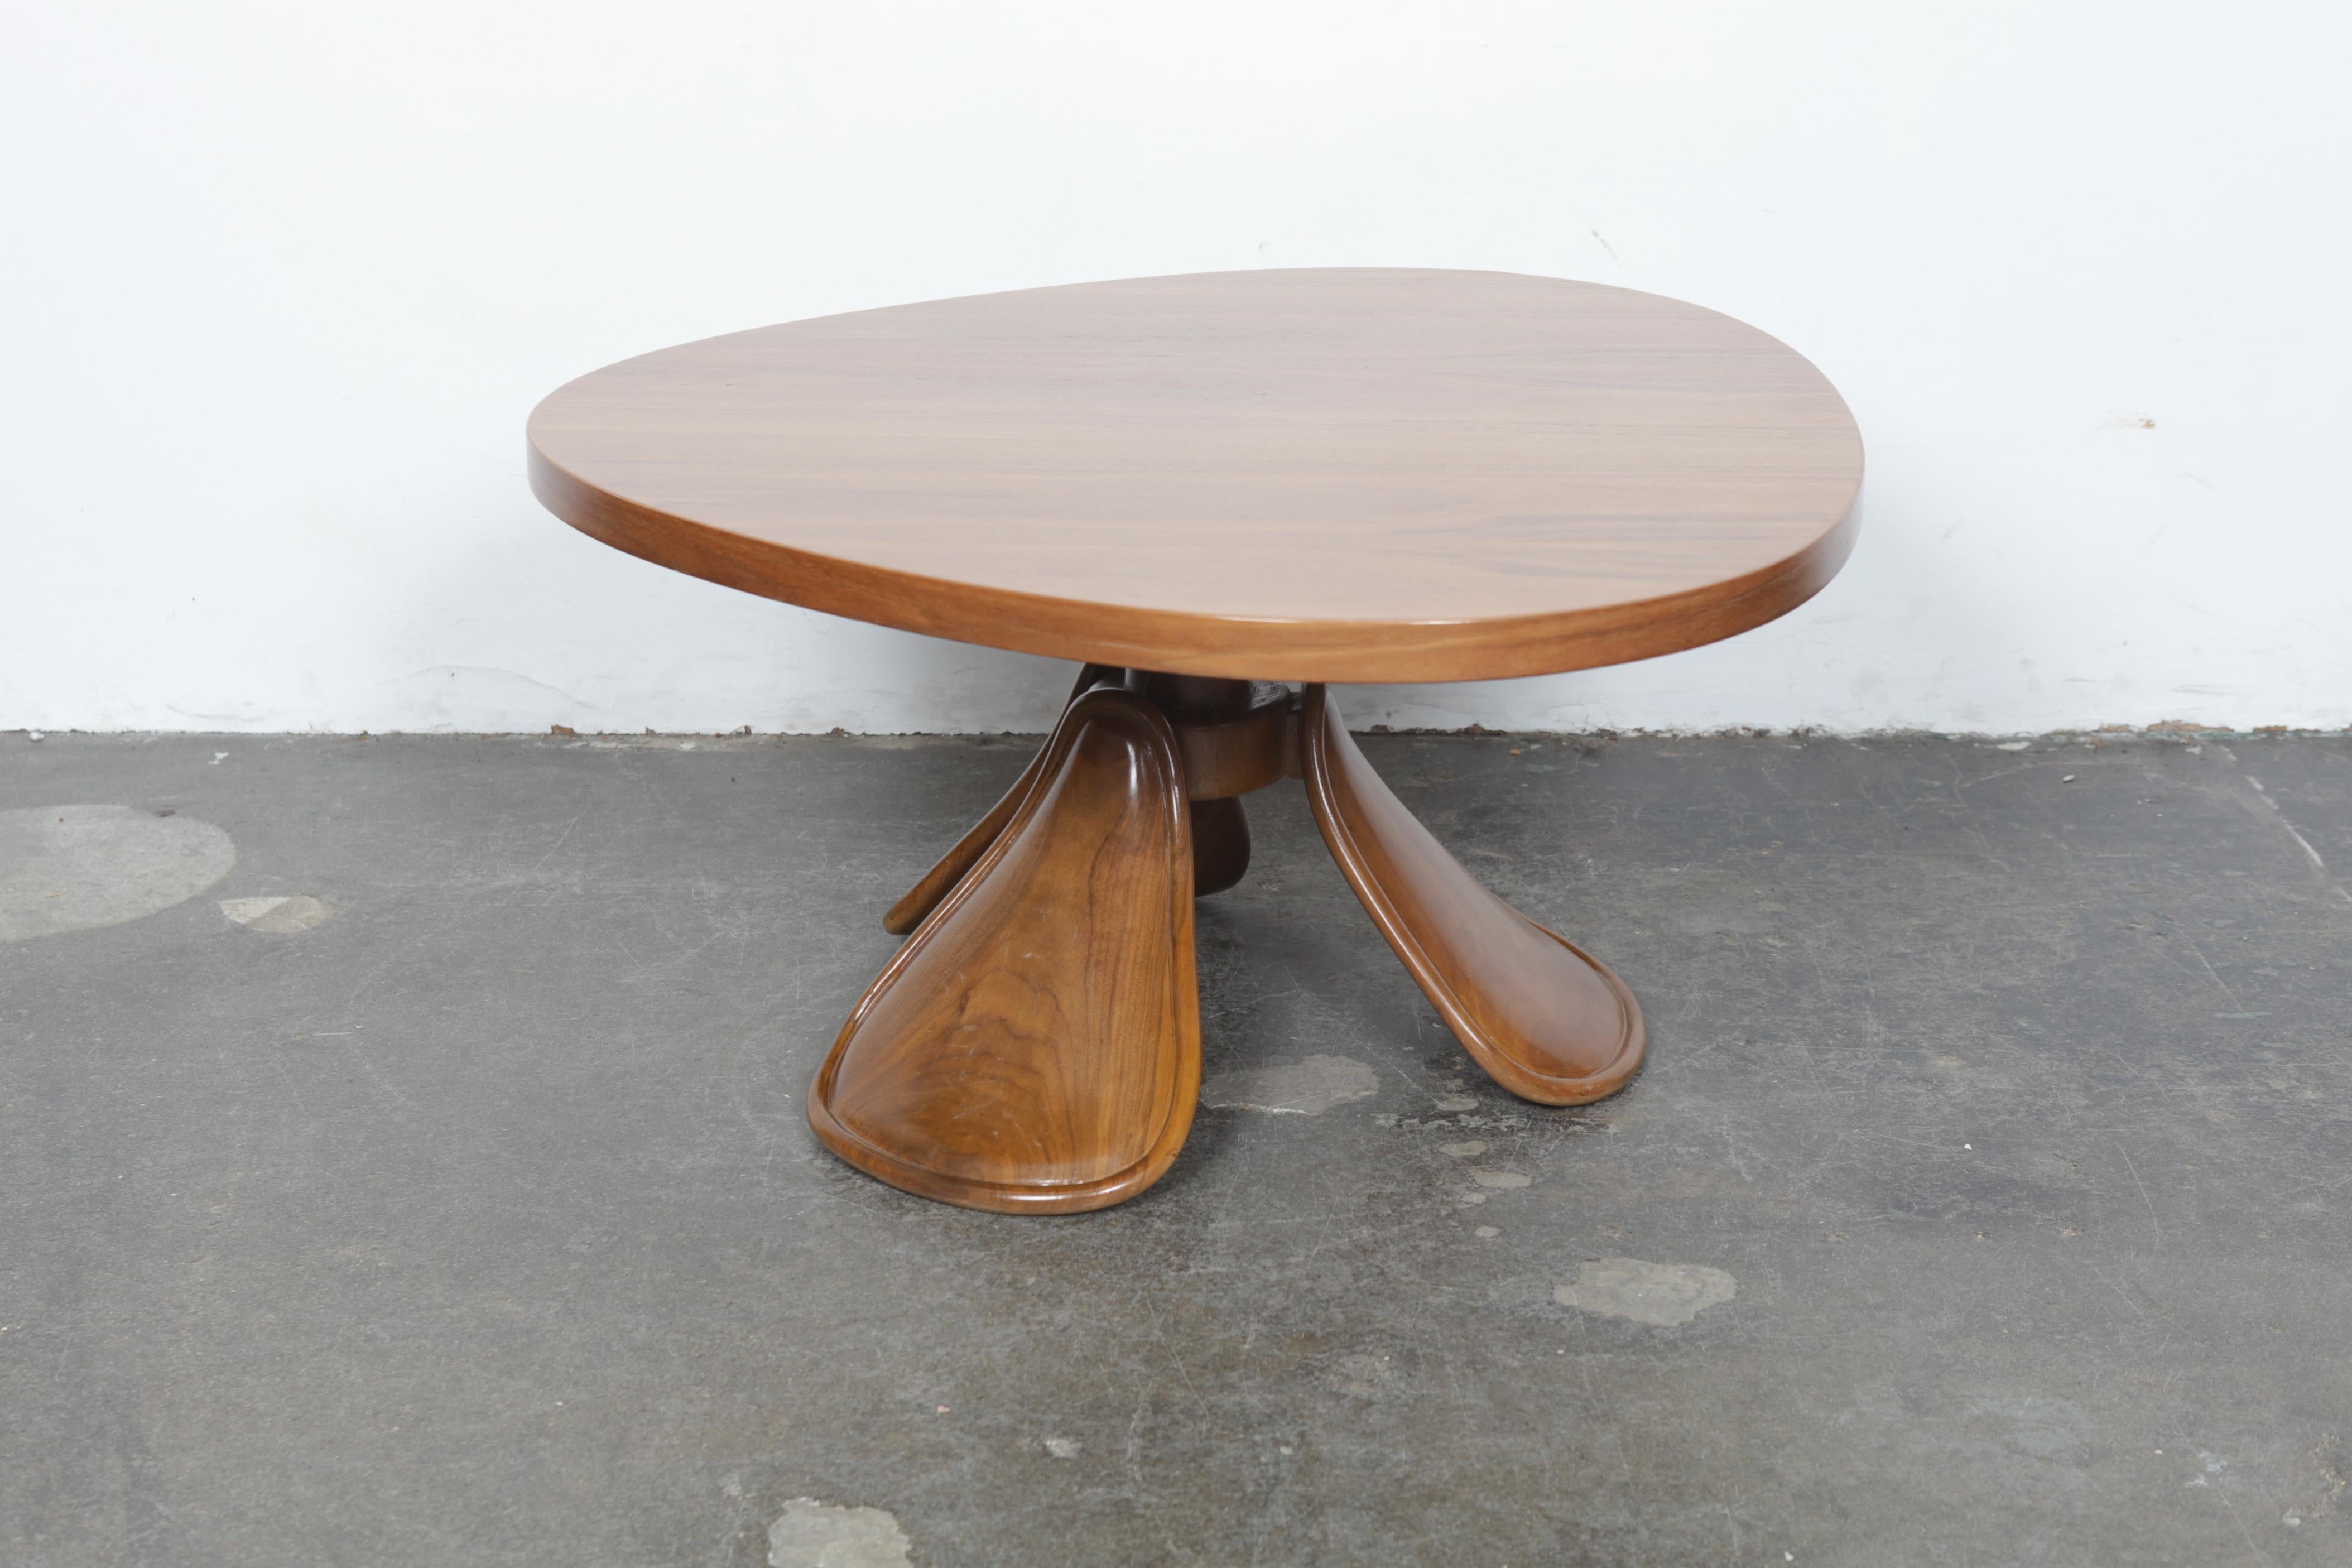 Lacquered Midcentury Walnut Coffee Table with Organic Rounded Top and Leaf Style Legs